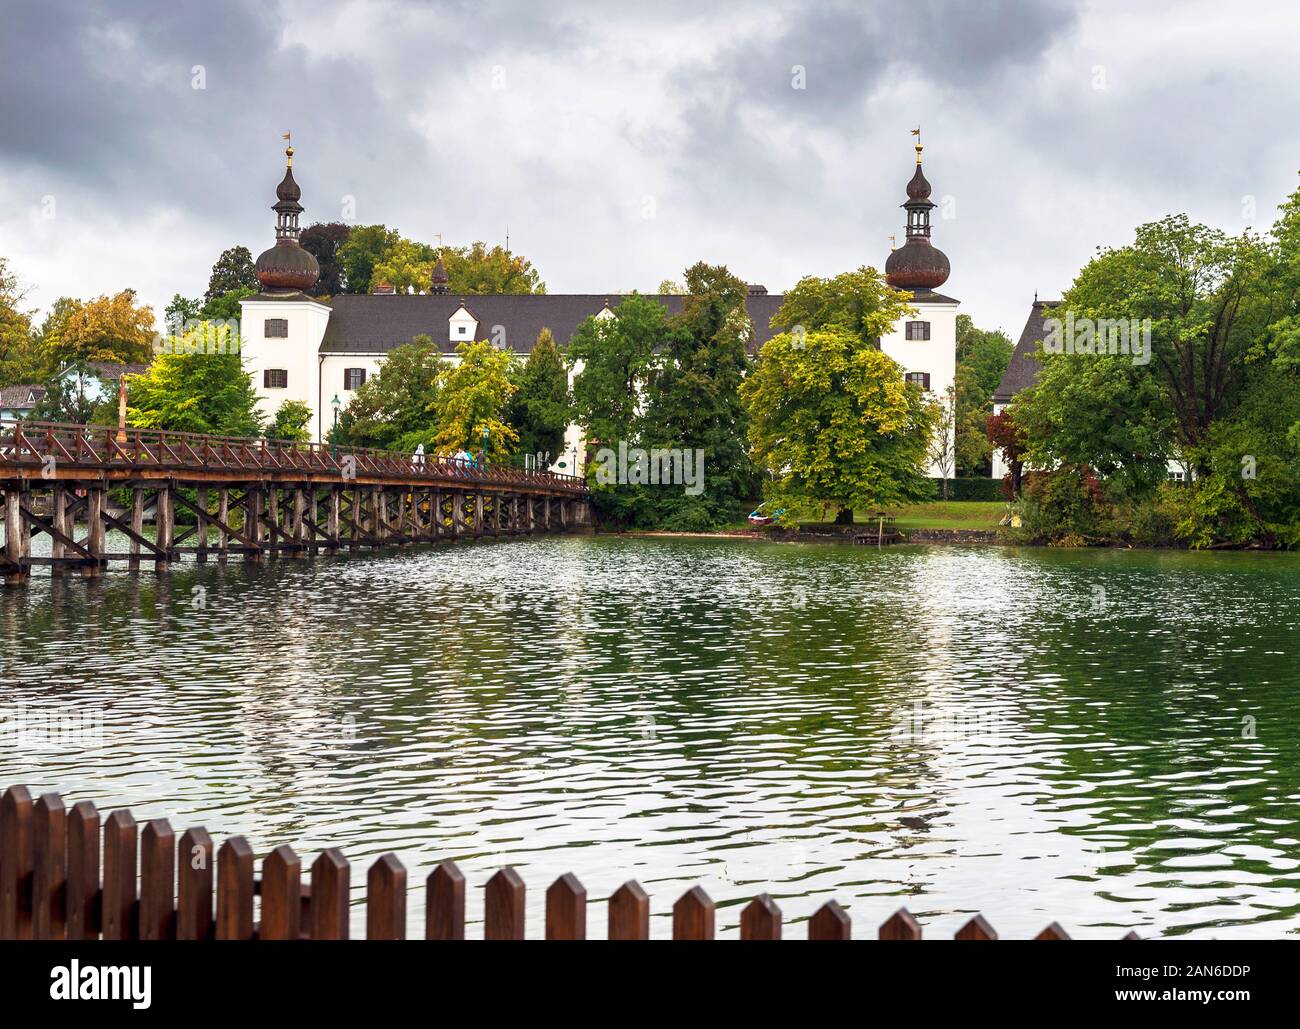 View on Traunsee church in Gmunden , Austria Stock Photo